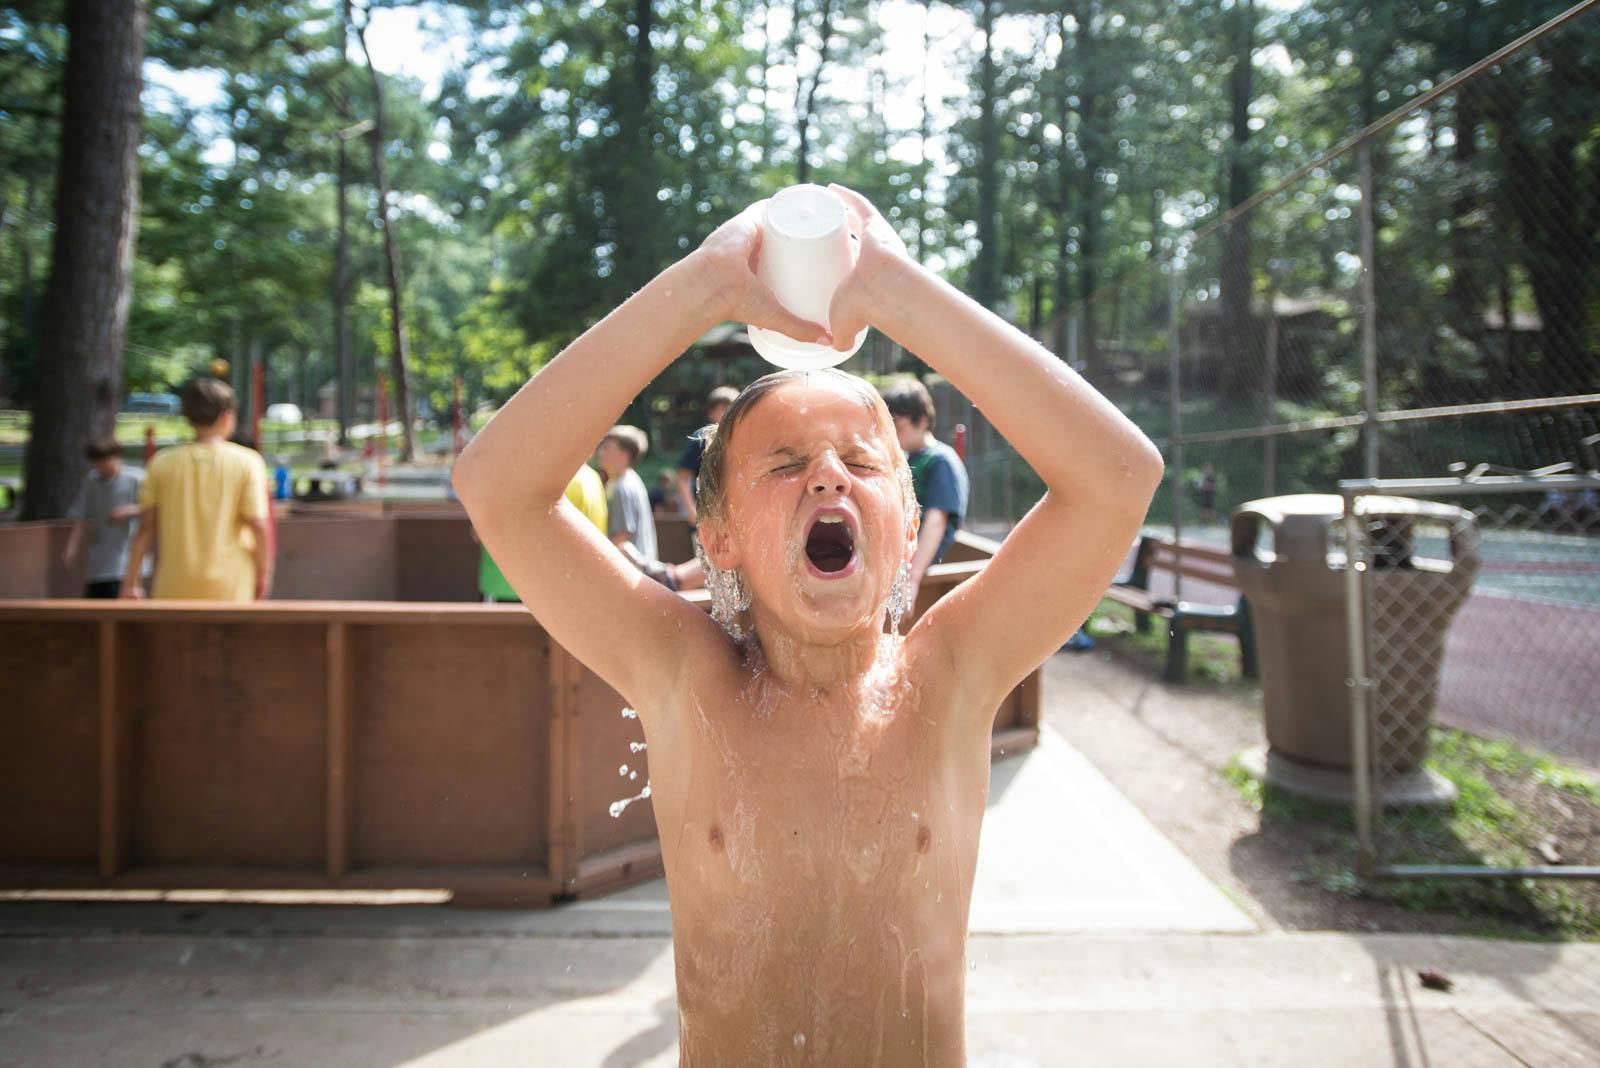 Boy dumping a cup of water over his head at a summer camp to cool off.